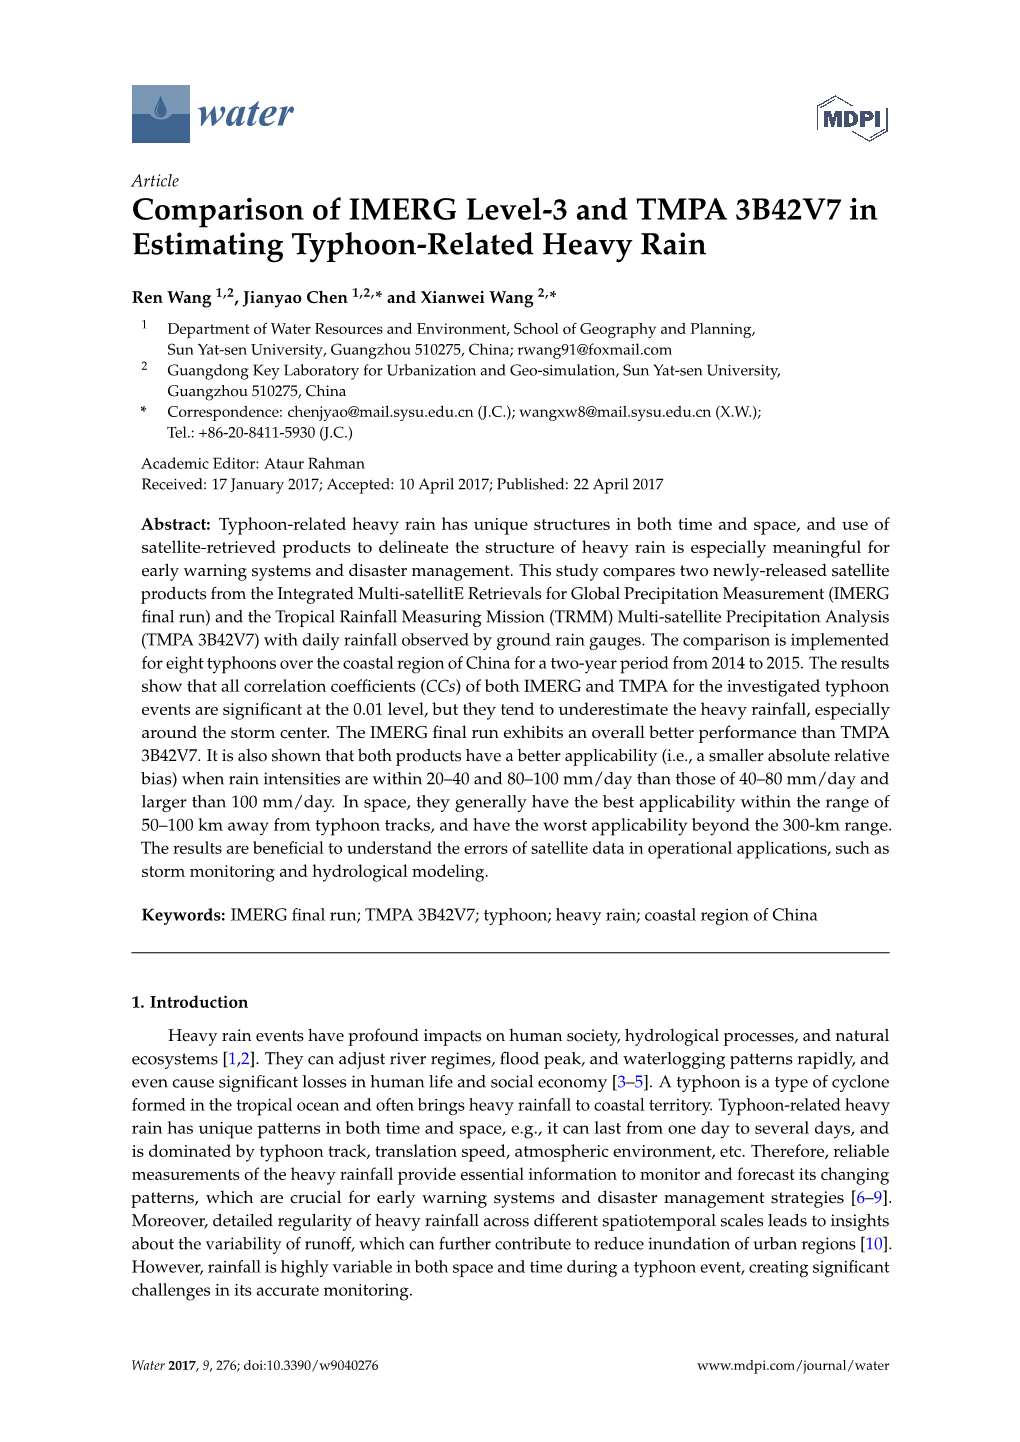 Comparison of IMERG Level-3 and TMPA 3B42V7 in Estimating Typhoon-Related Heavy Rain